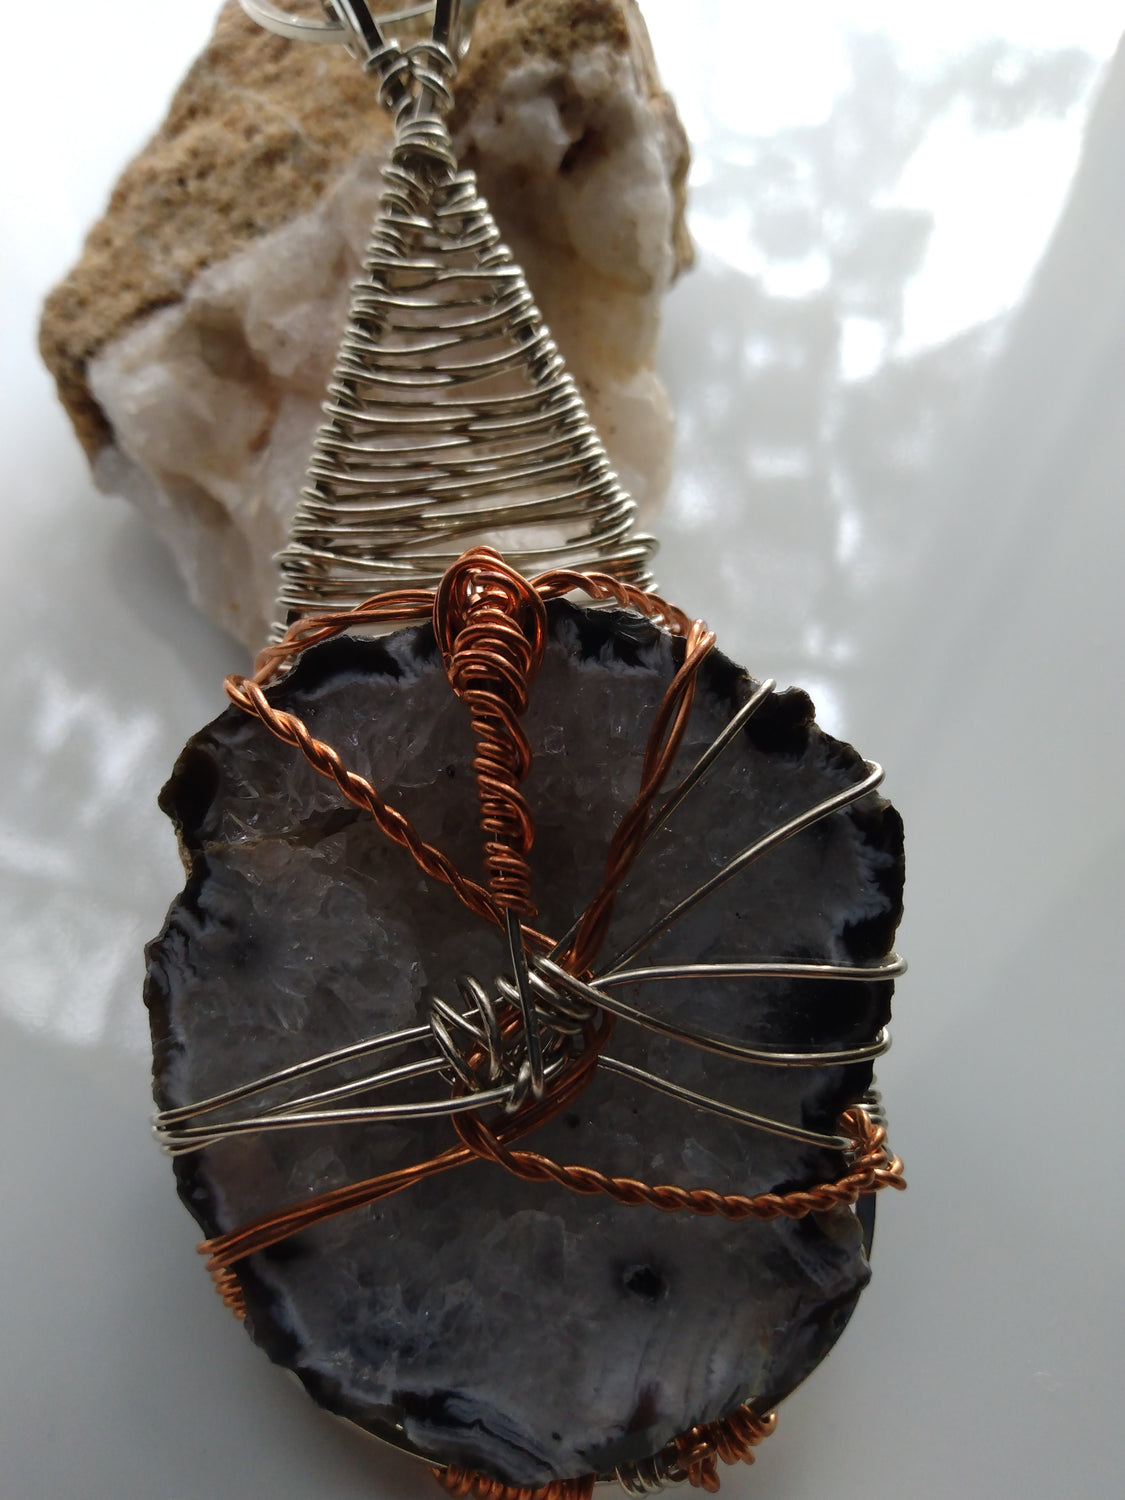 Geode Agate Wire Wrapped Pendant Copper Nickel + Stainless Steel Ball Chain Necklace